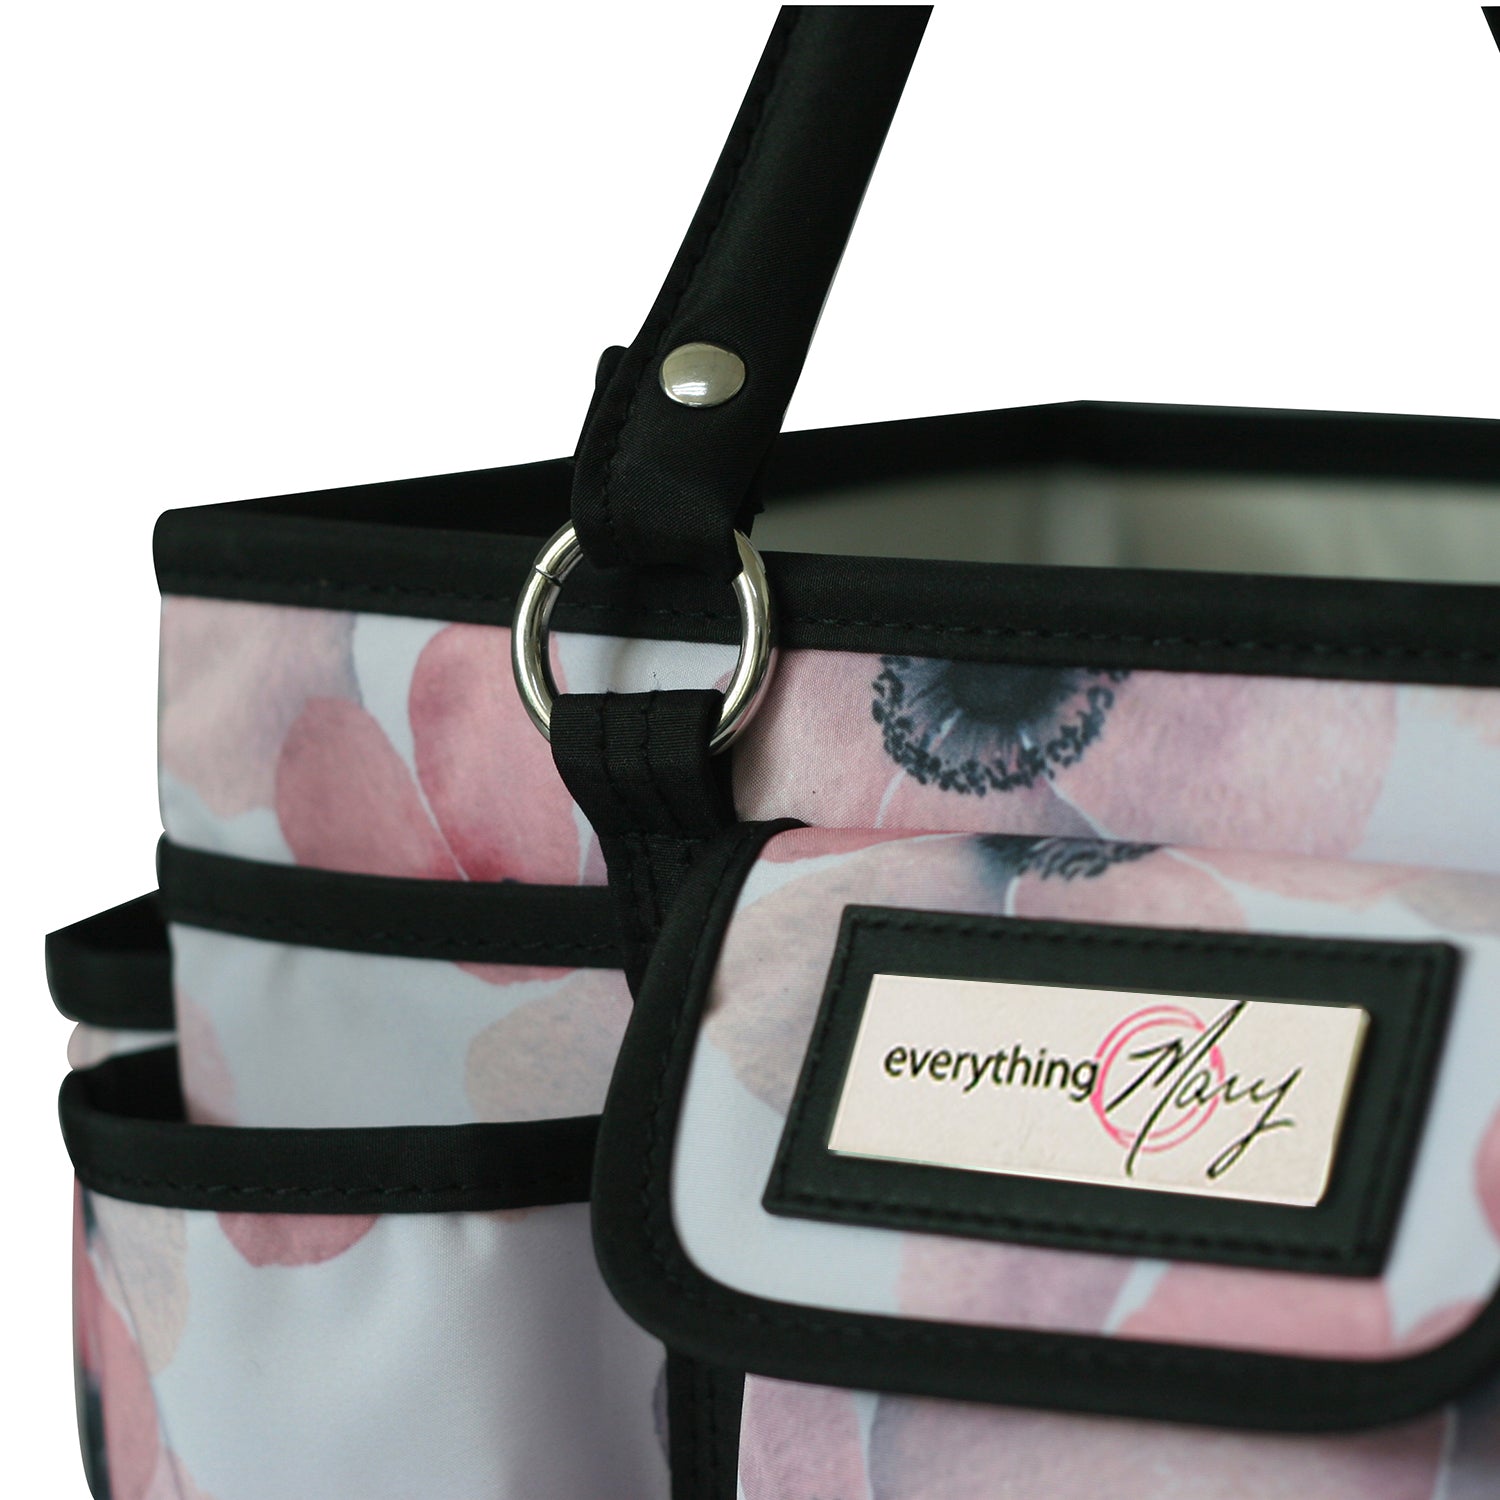 Deluxe Store & Tote Craft Organizer, Black & White Floral - Everything Mary